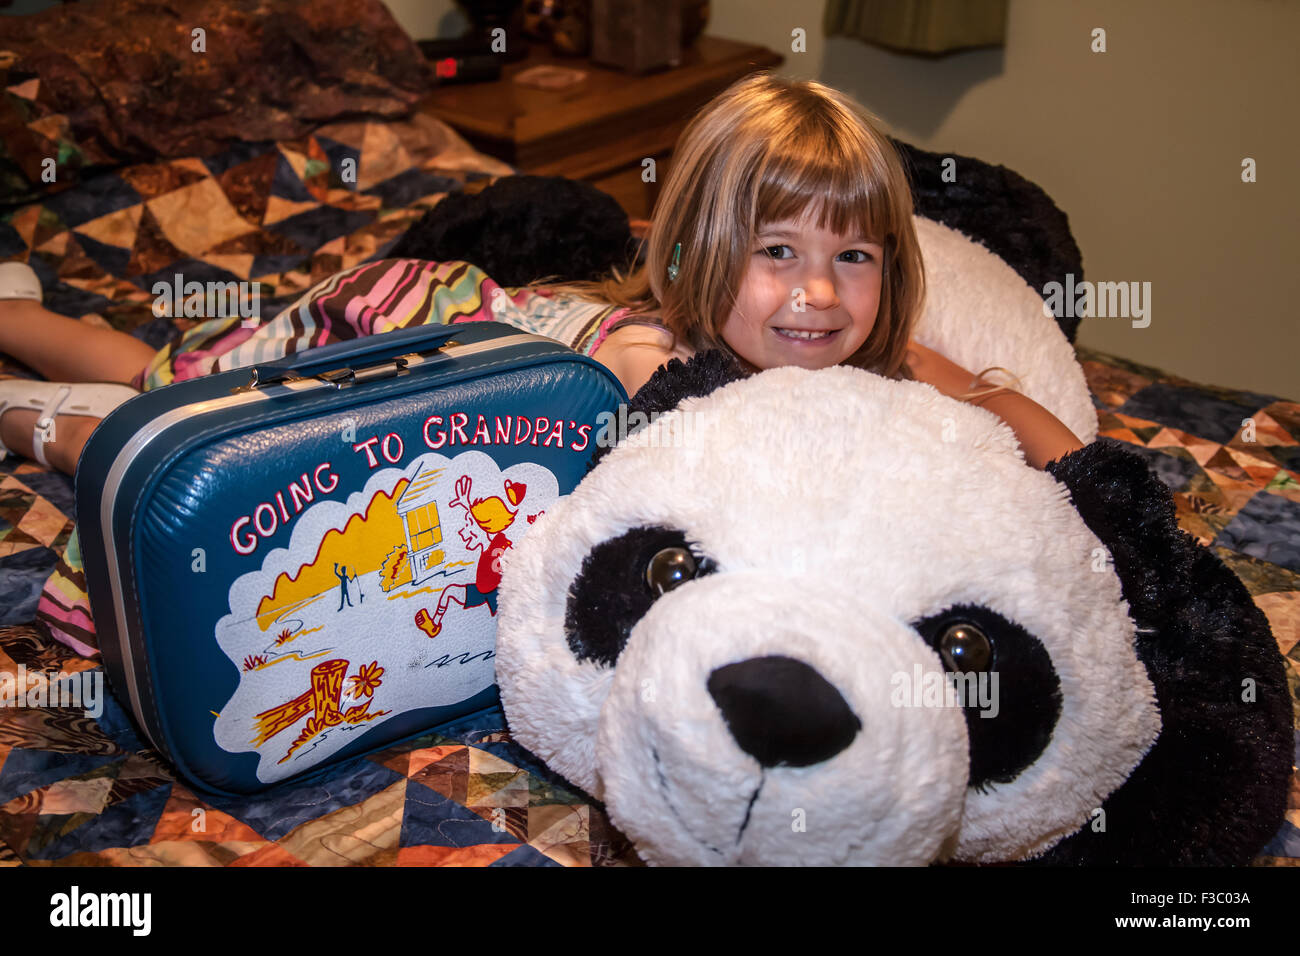 Four year old girl hugging large stuffed panda bear that she's going to sleep with while staying at her grandparent's house Stock Photo